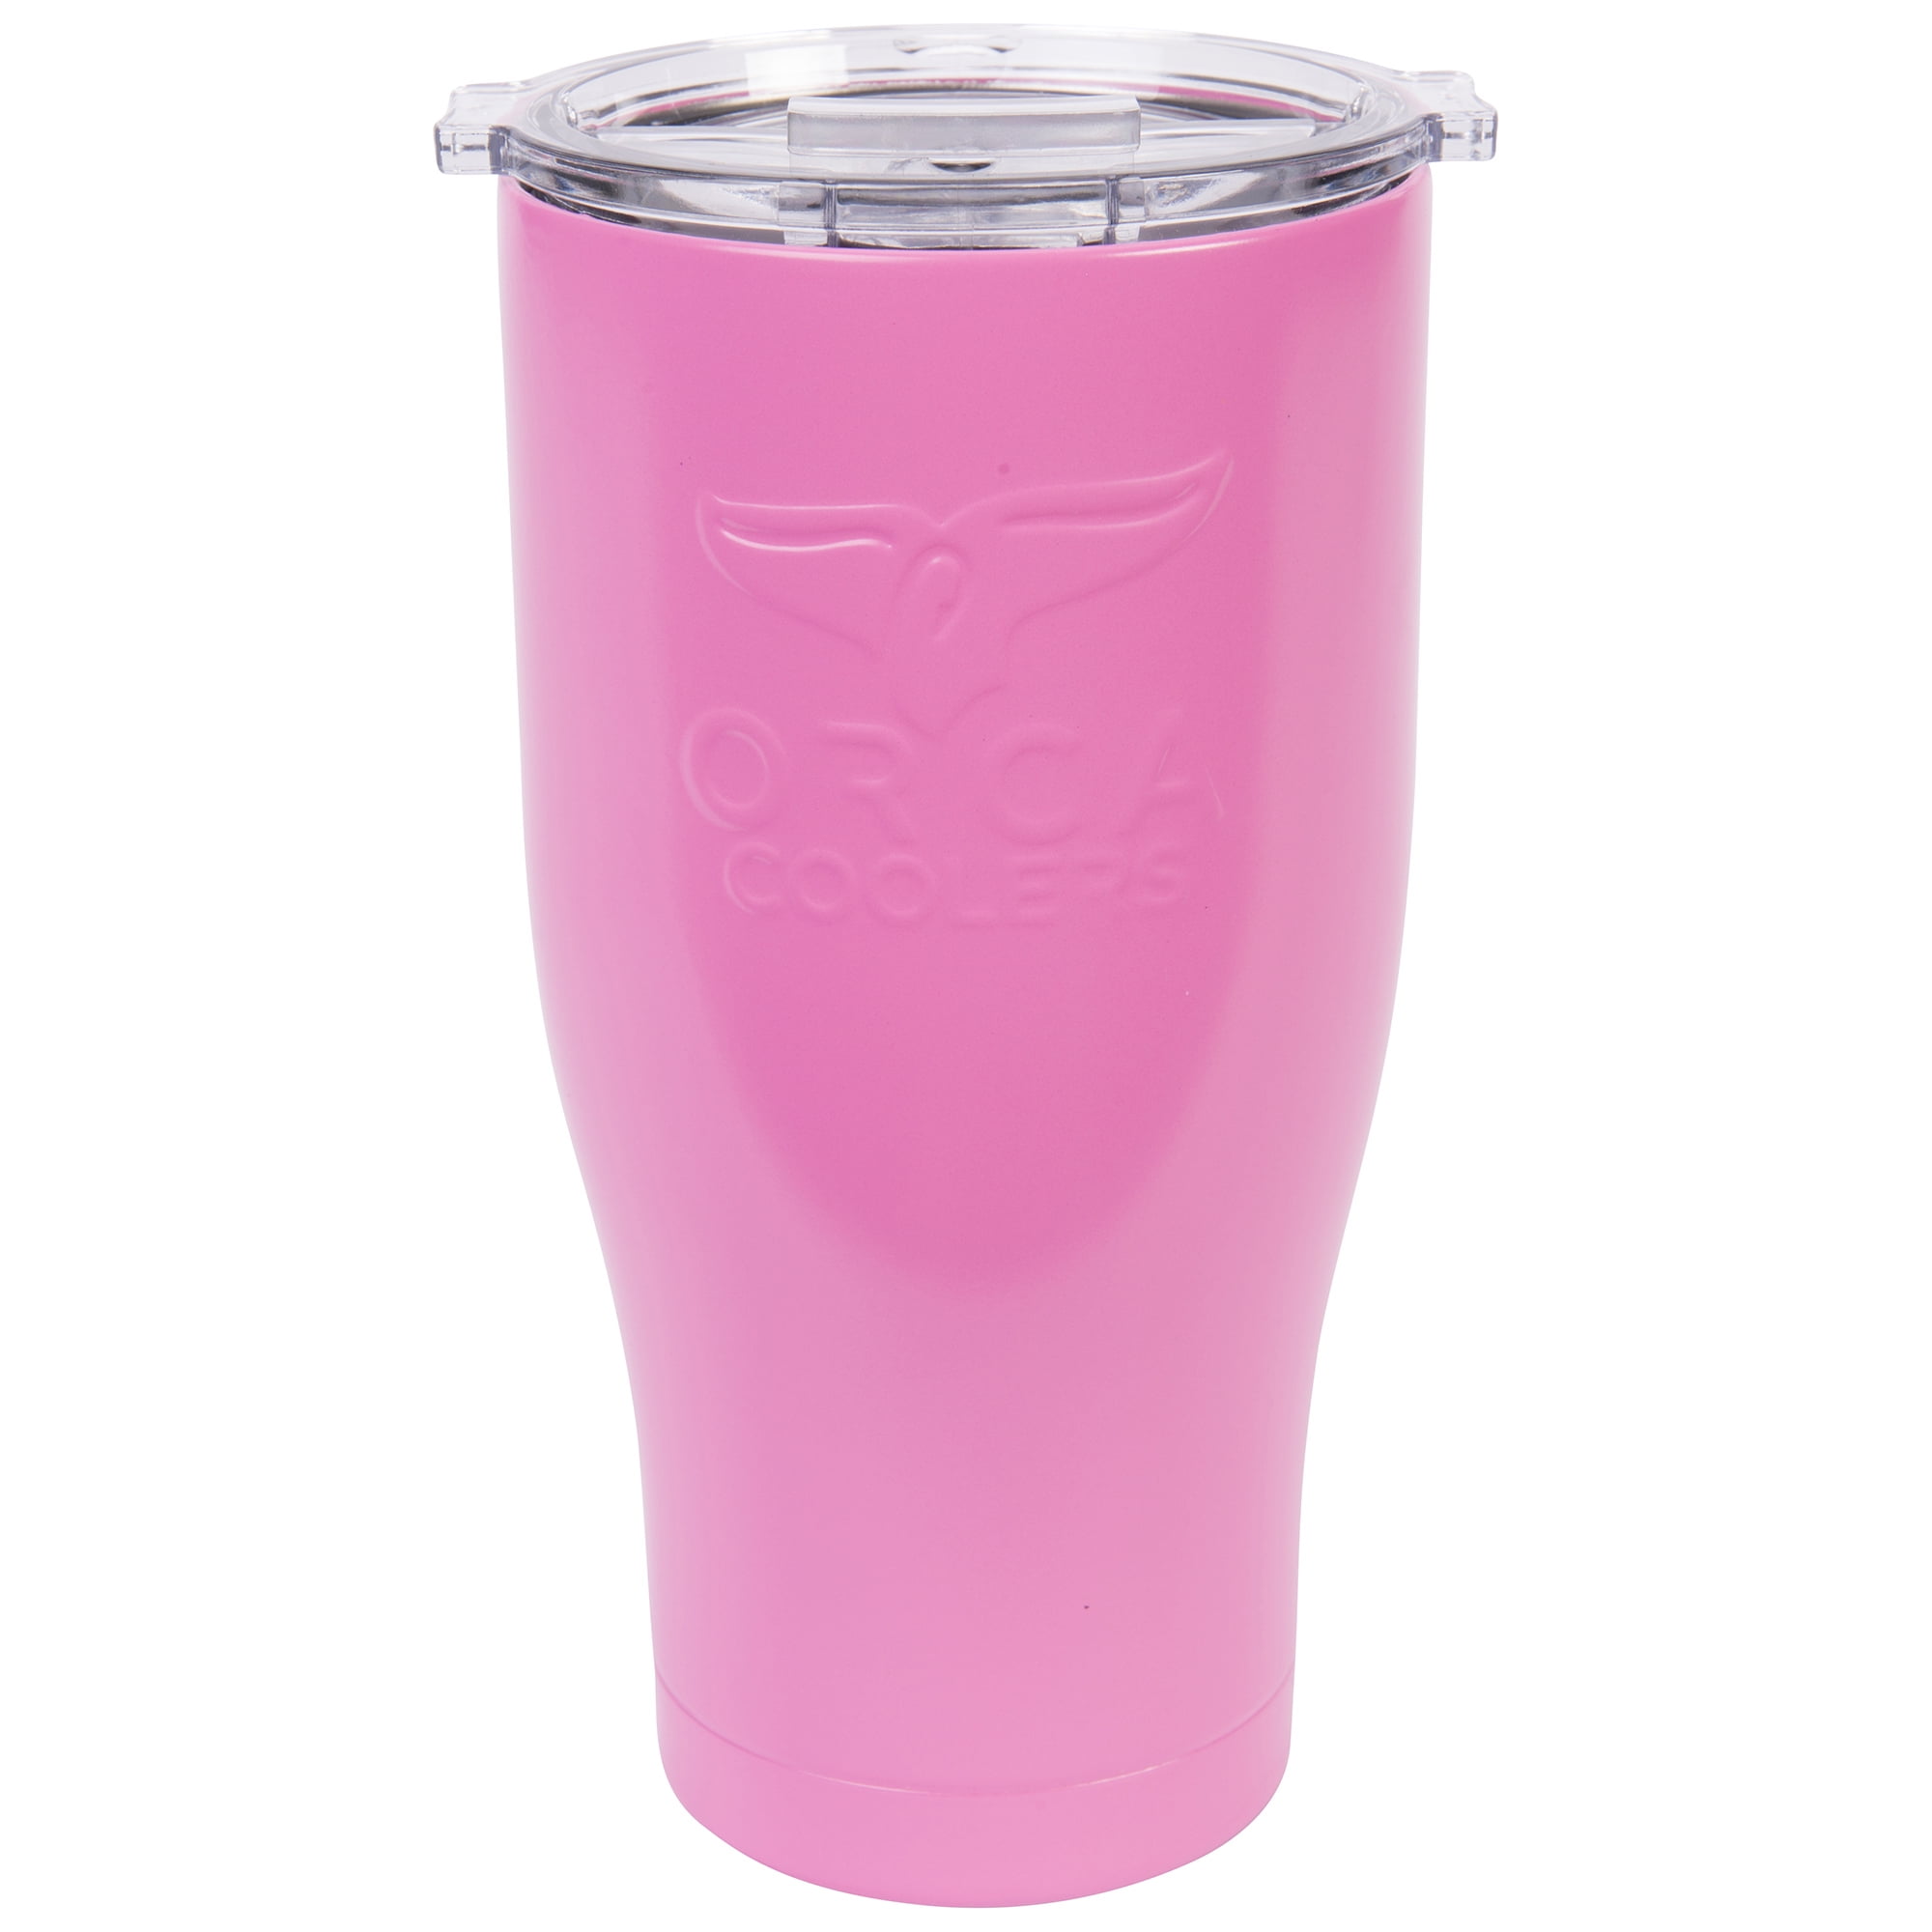 Orca ORCC27HSS 27 oz Chaser Insulated Cup, Hammered Stainless, 1